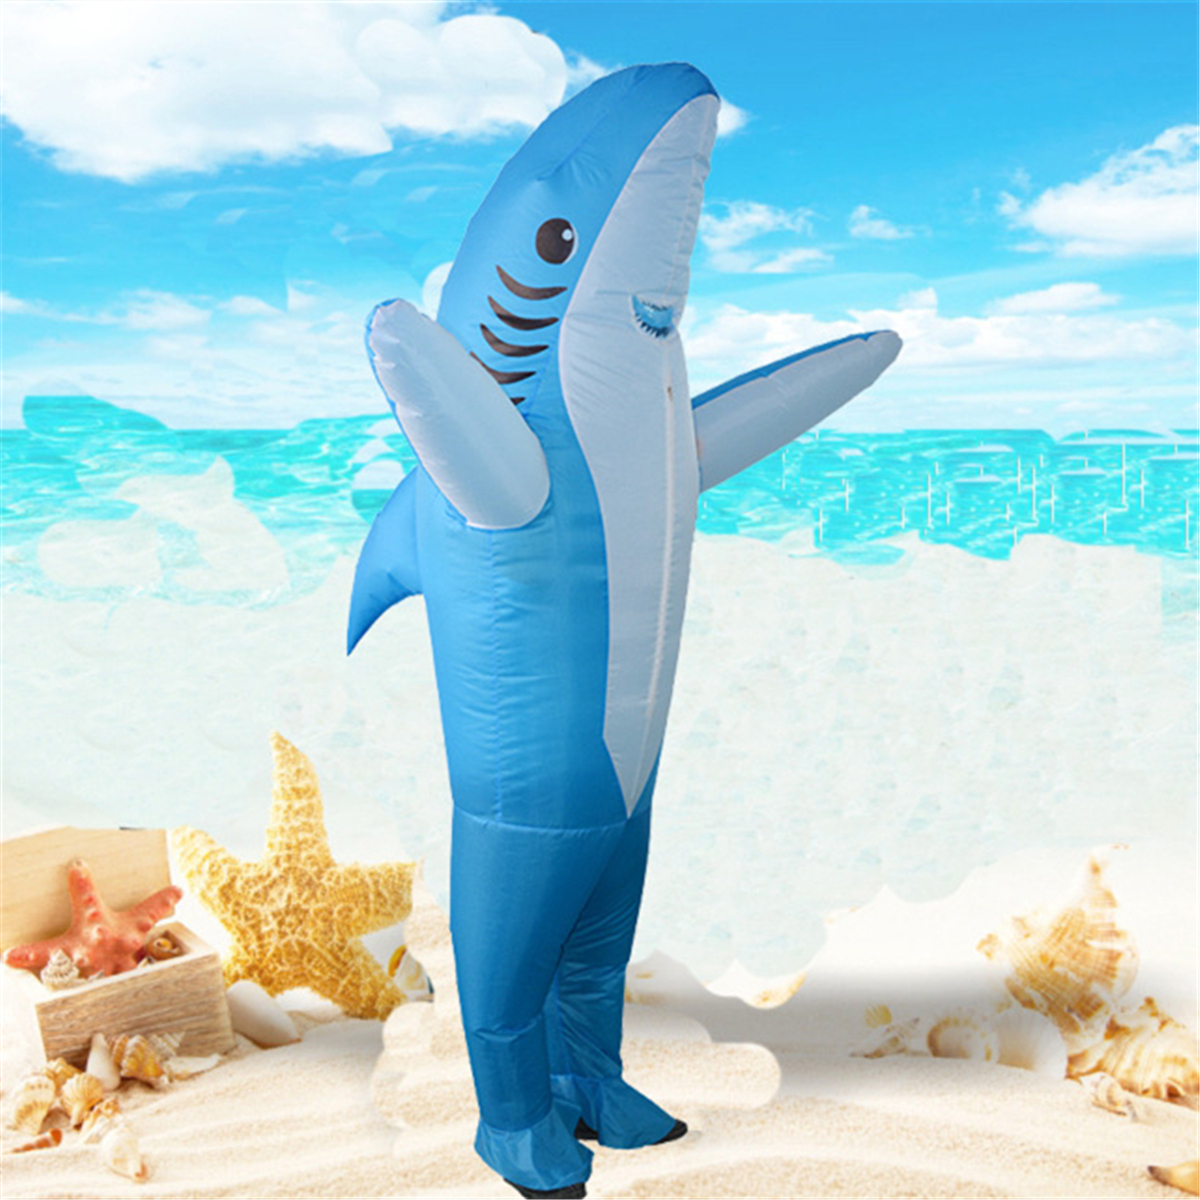 Inflatable Costumes Shark Adult Halloween Fancy Dress Funny Scary Dress Costume 14